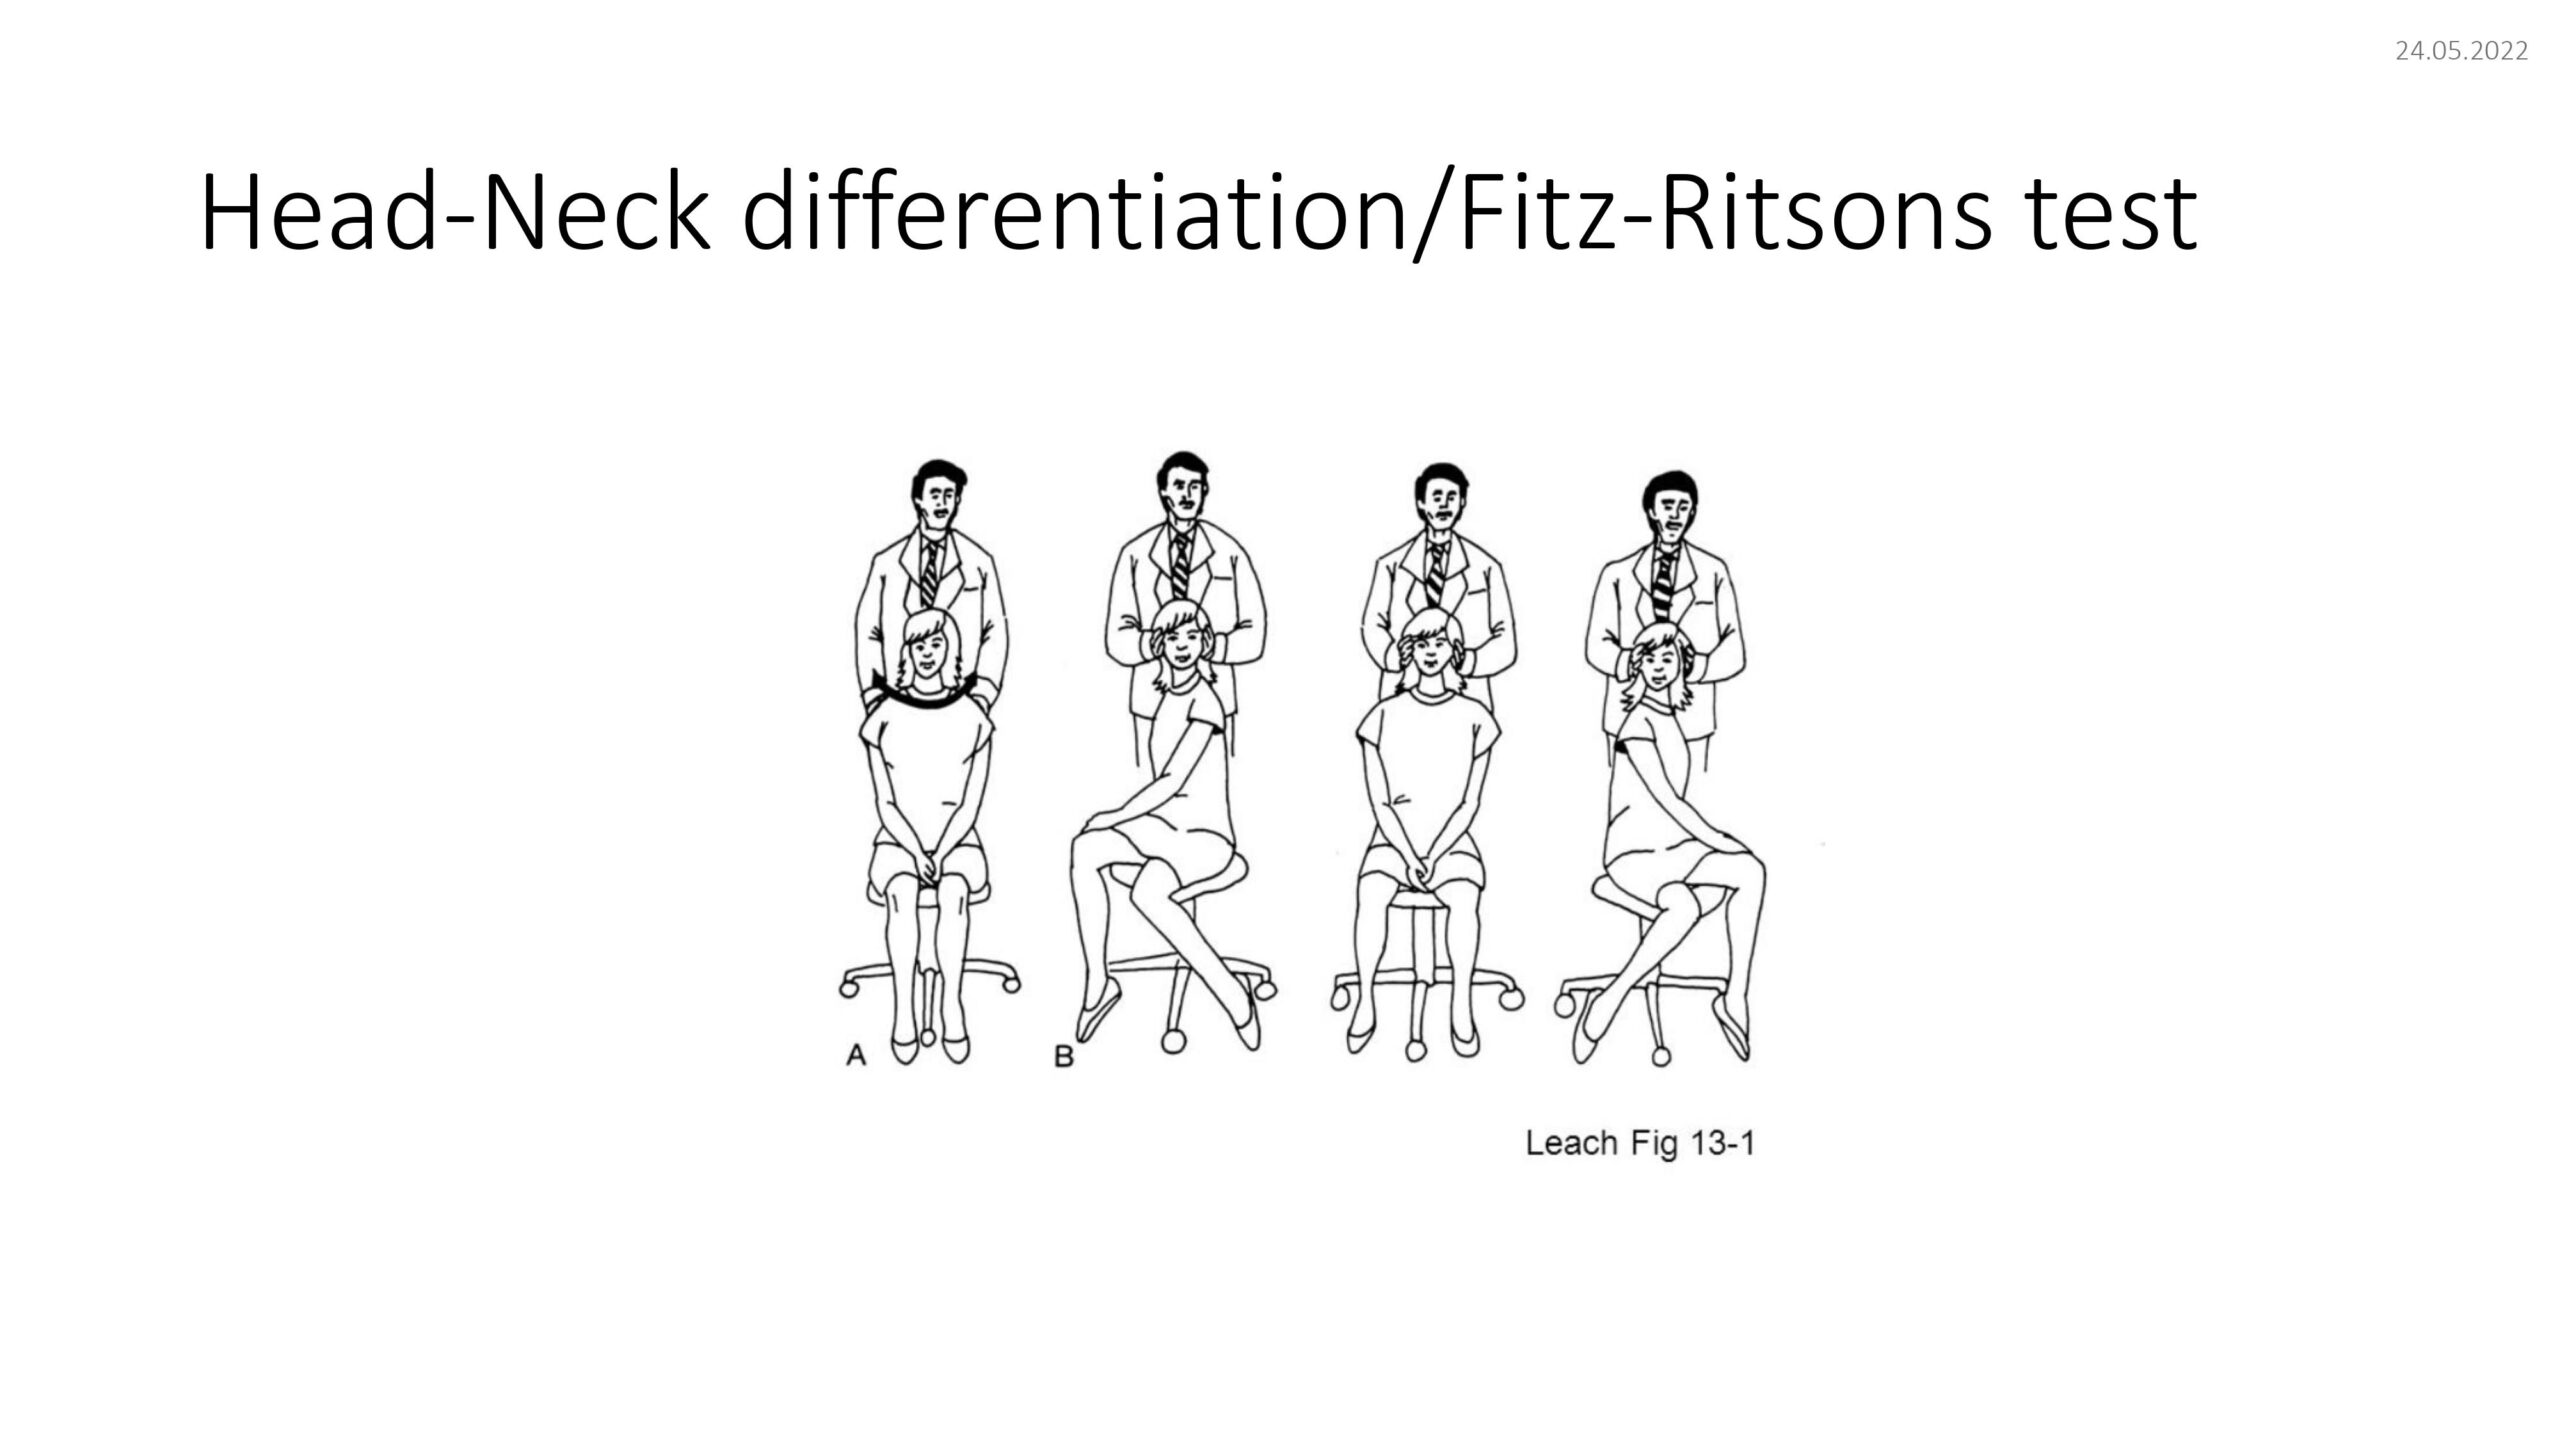 Head_Neck differentiation/Fitz-ritsons test